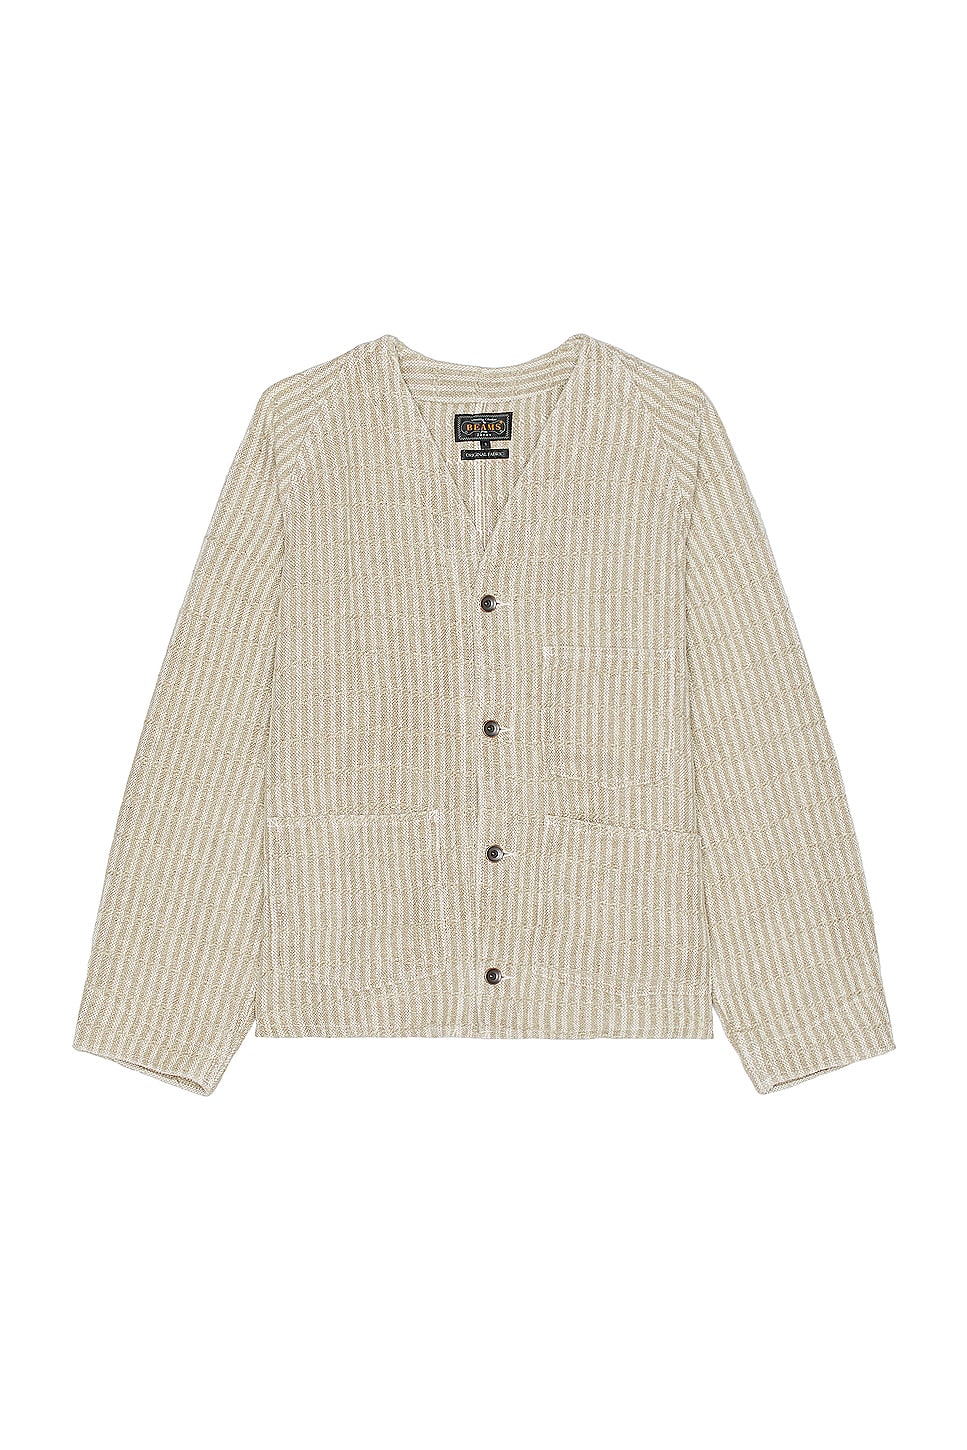 Image 1 of Beams Plus Engineer Jacket Linen Hickory Stripe in Natural